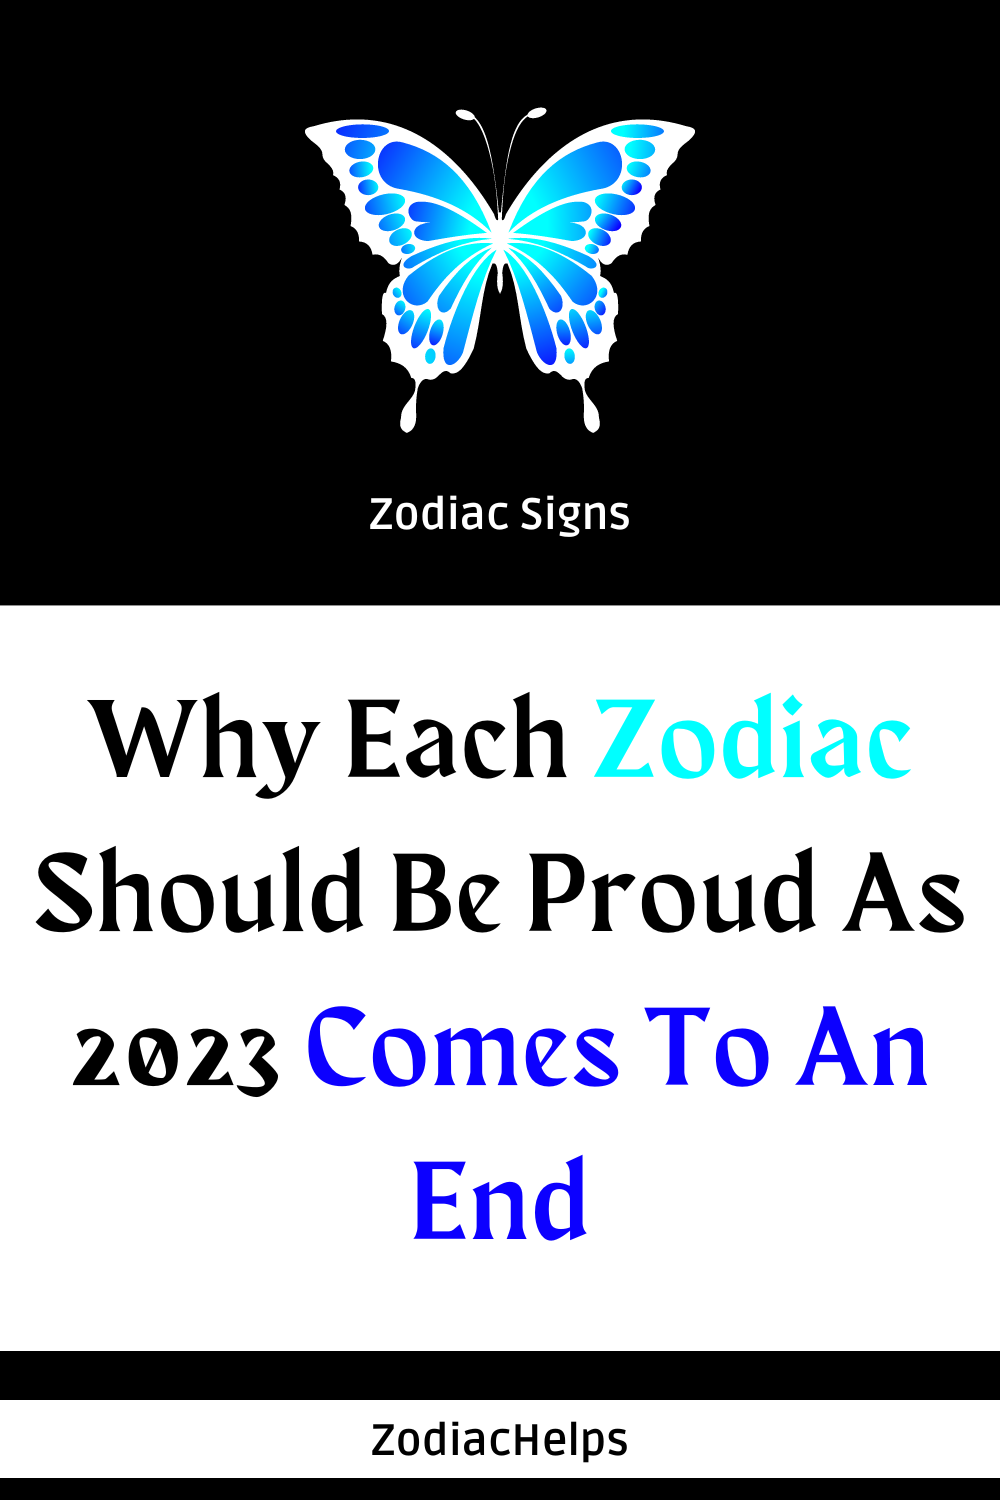 Why Each Zodiac Should Be Proud As 2023 Comes To An End